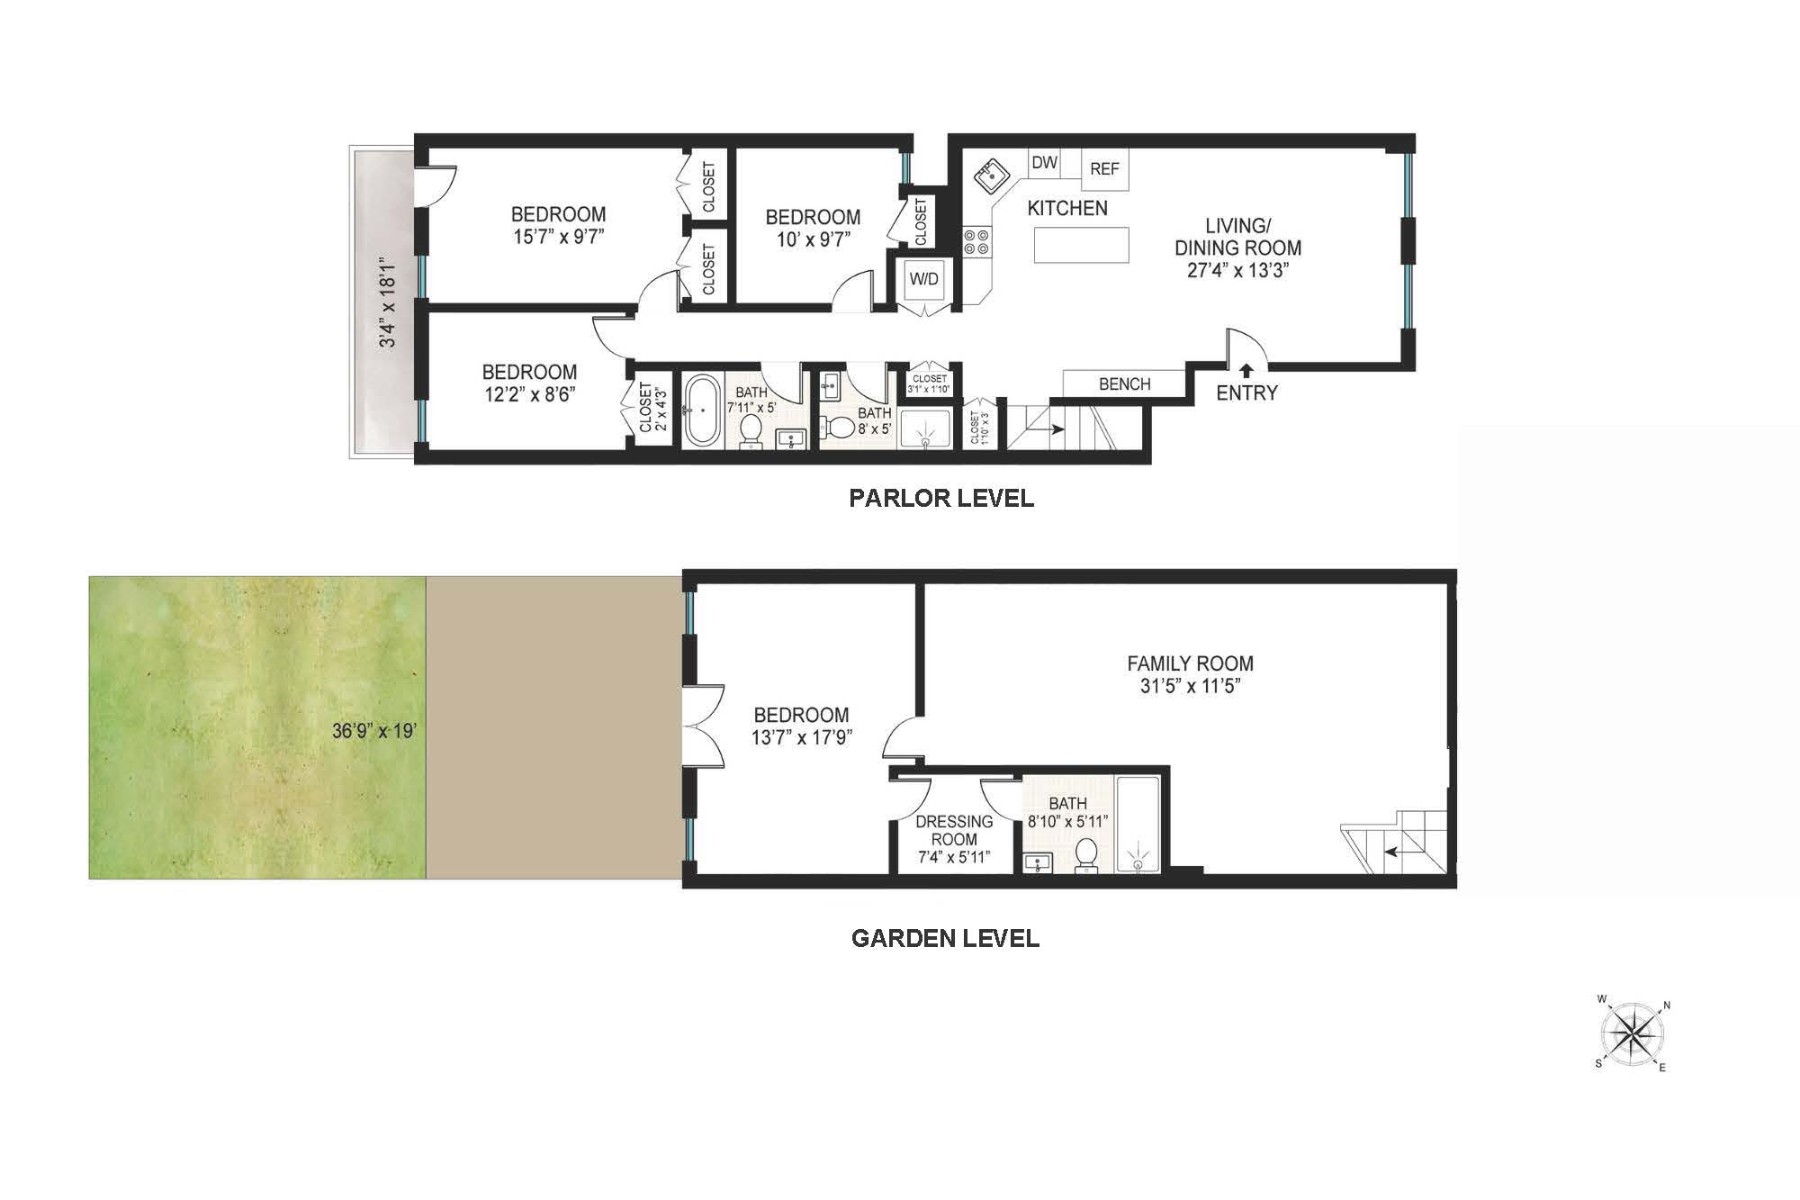 Floorplan for 42 St Marks Place, 1